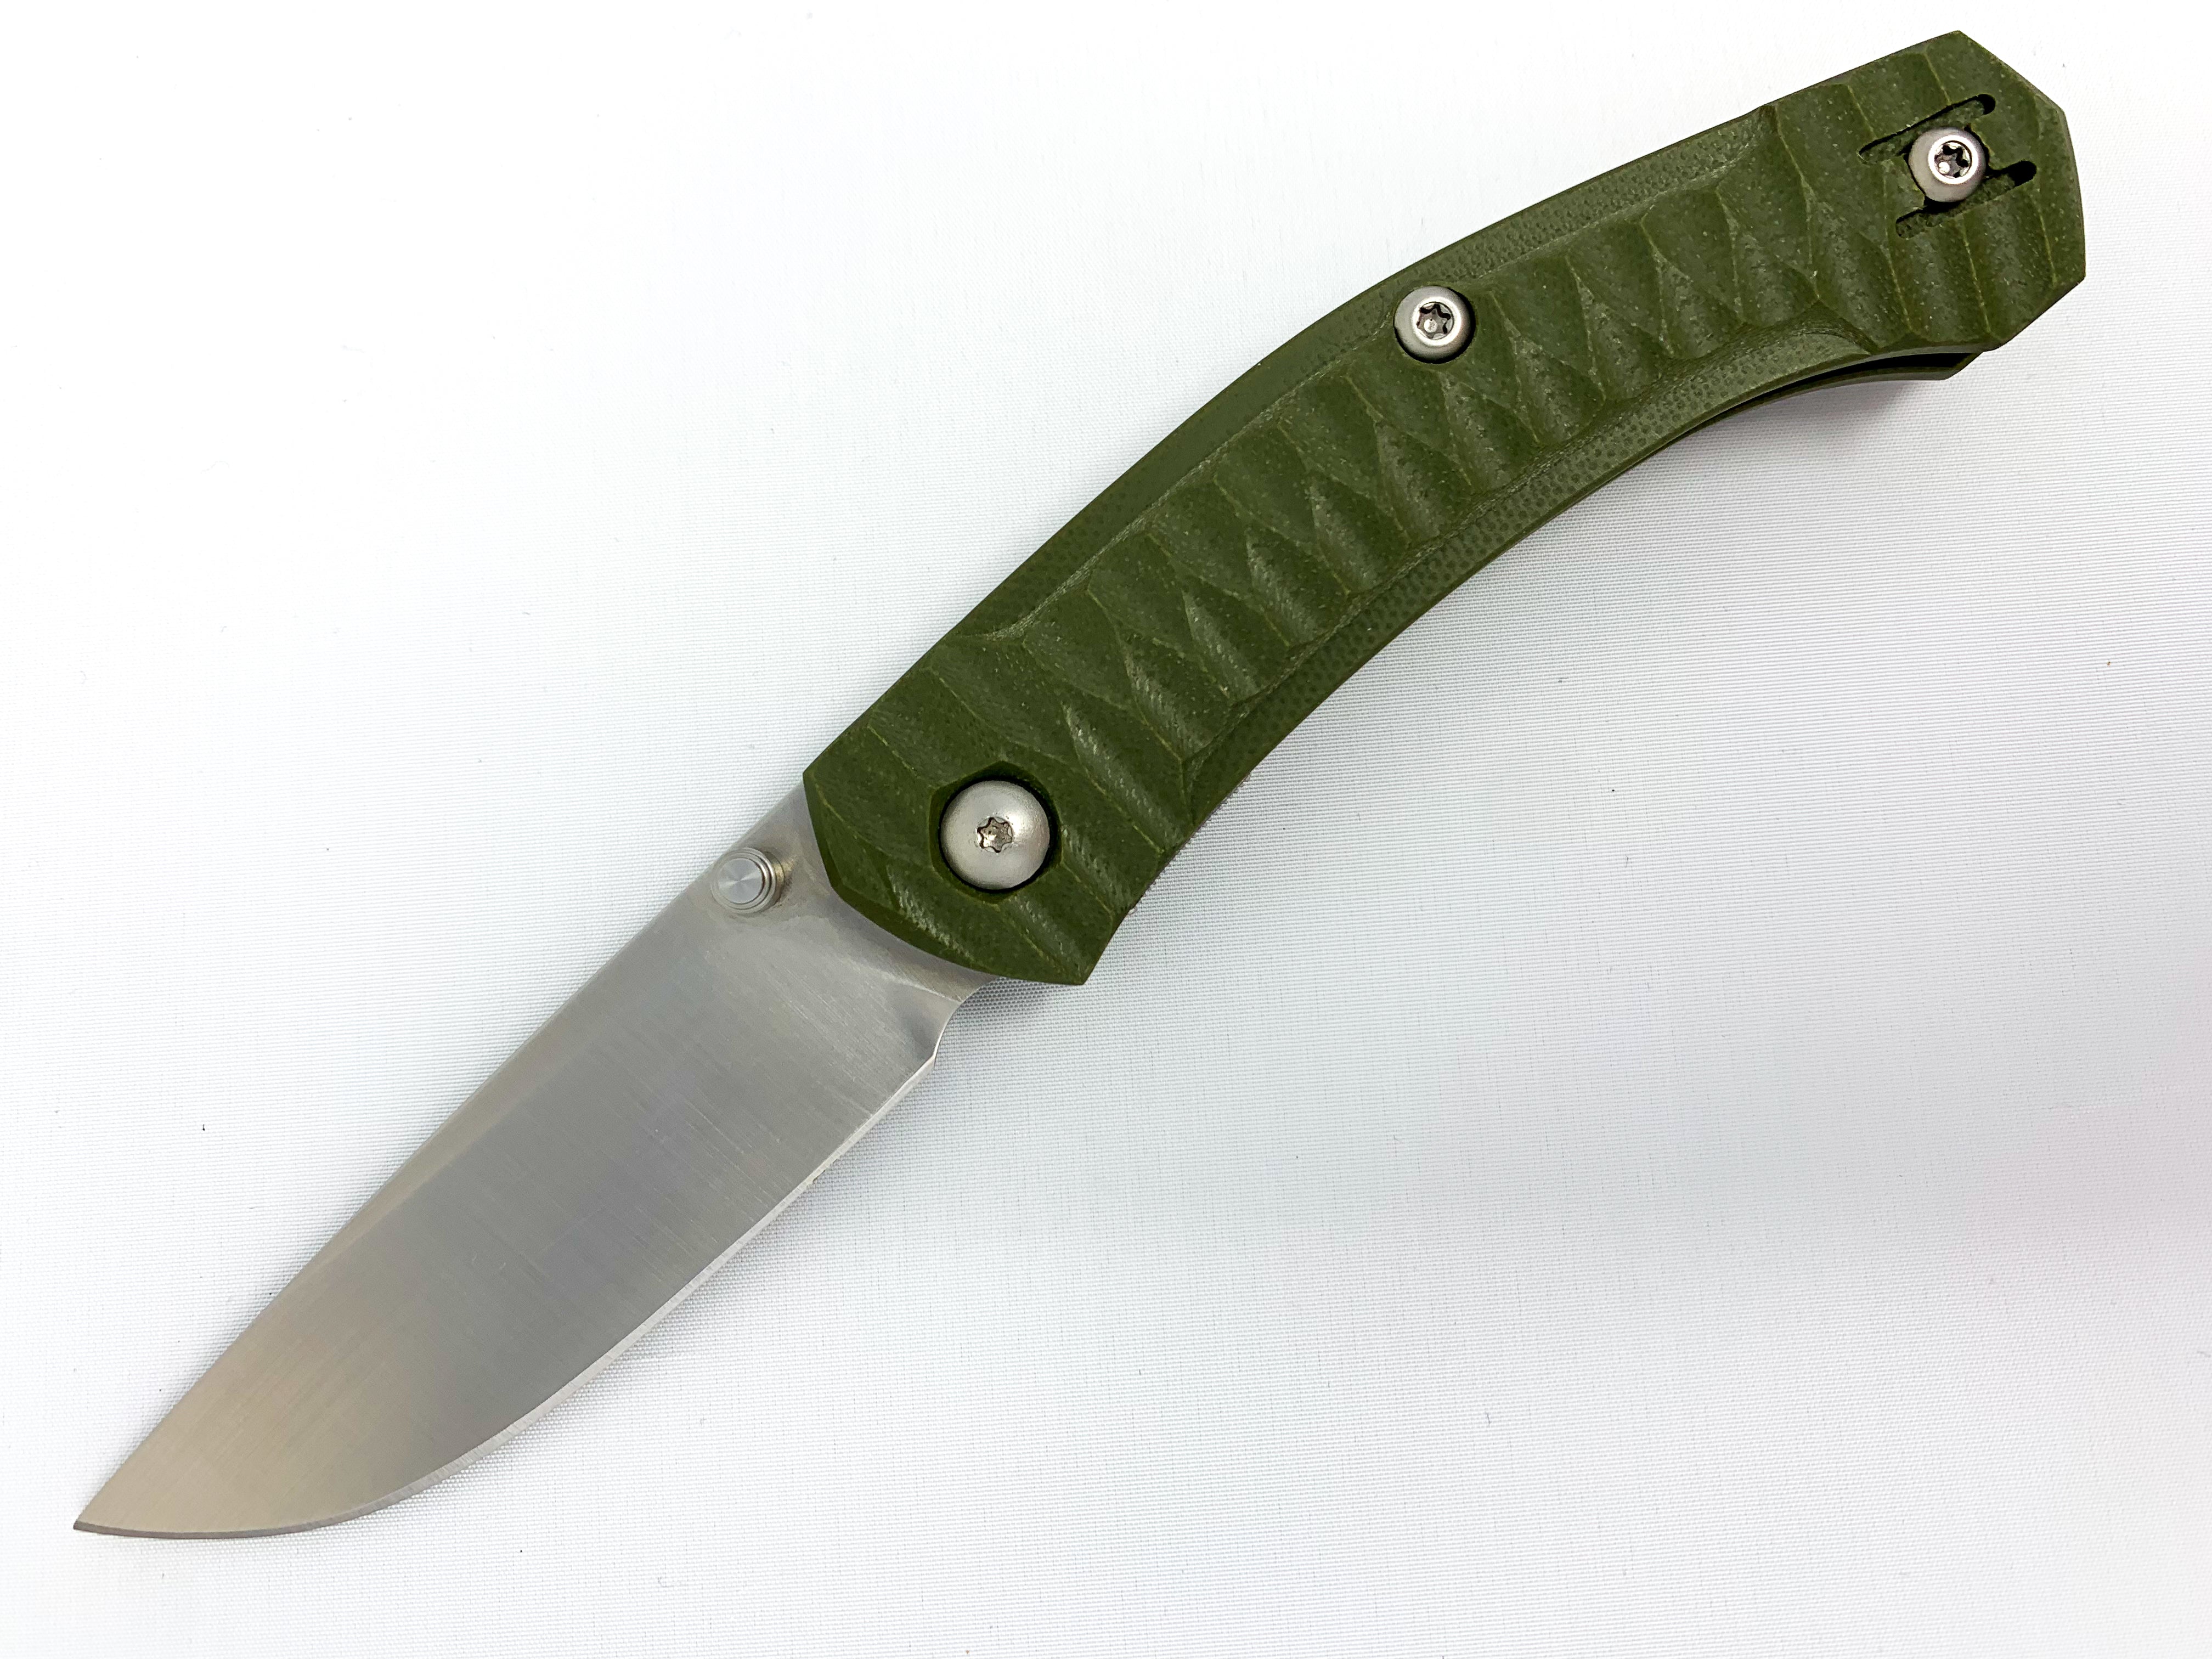 GiantMouse - ACE Iona - Green G10 - Liner Lock - M390 - CLOSEOUT